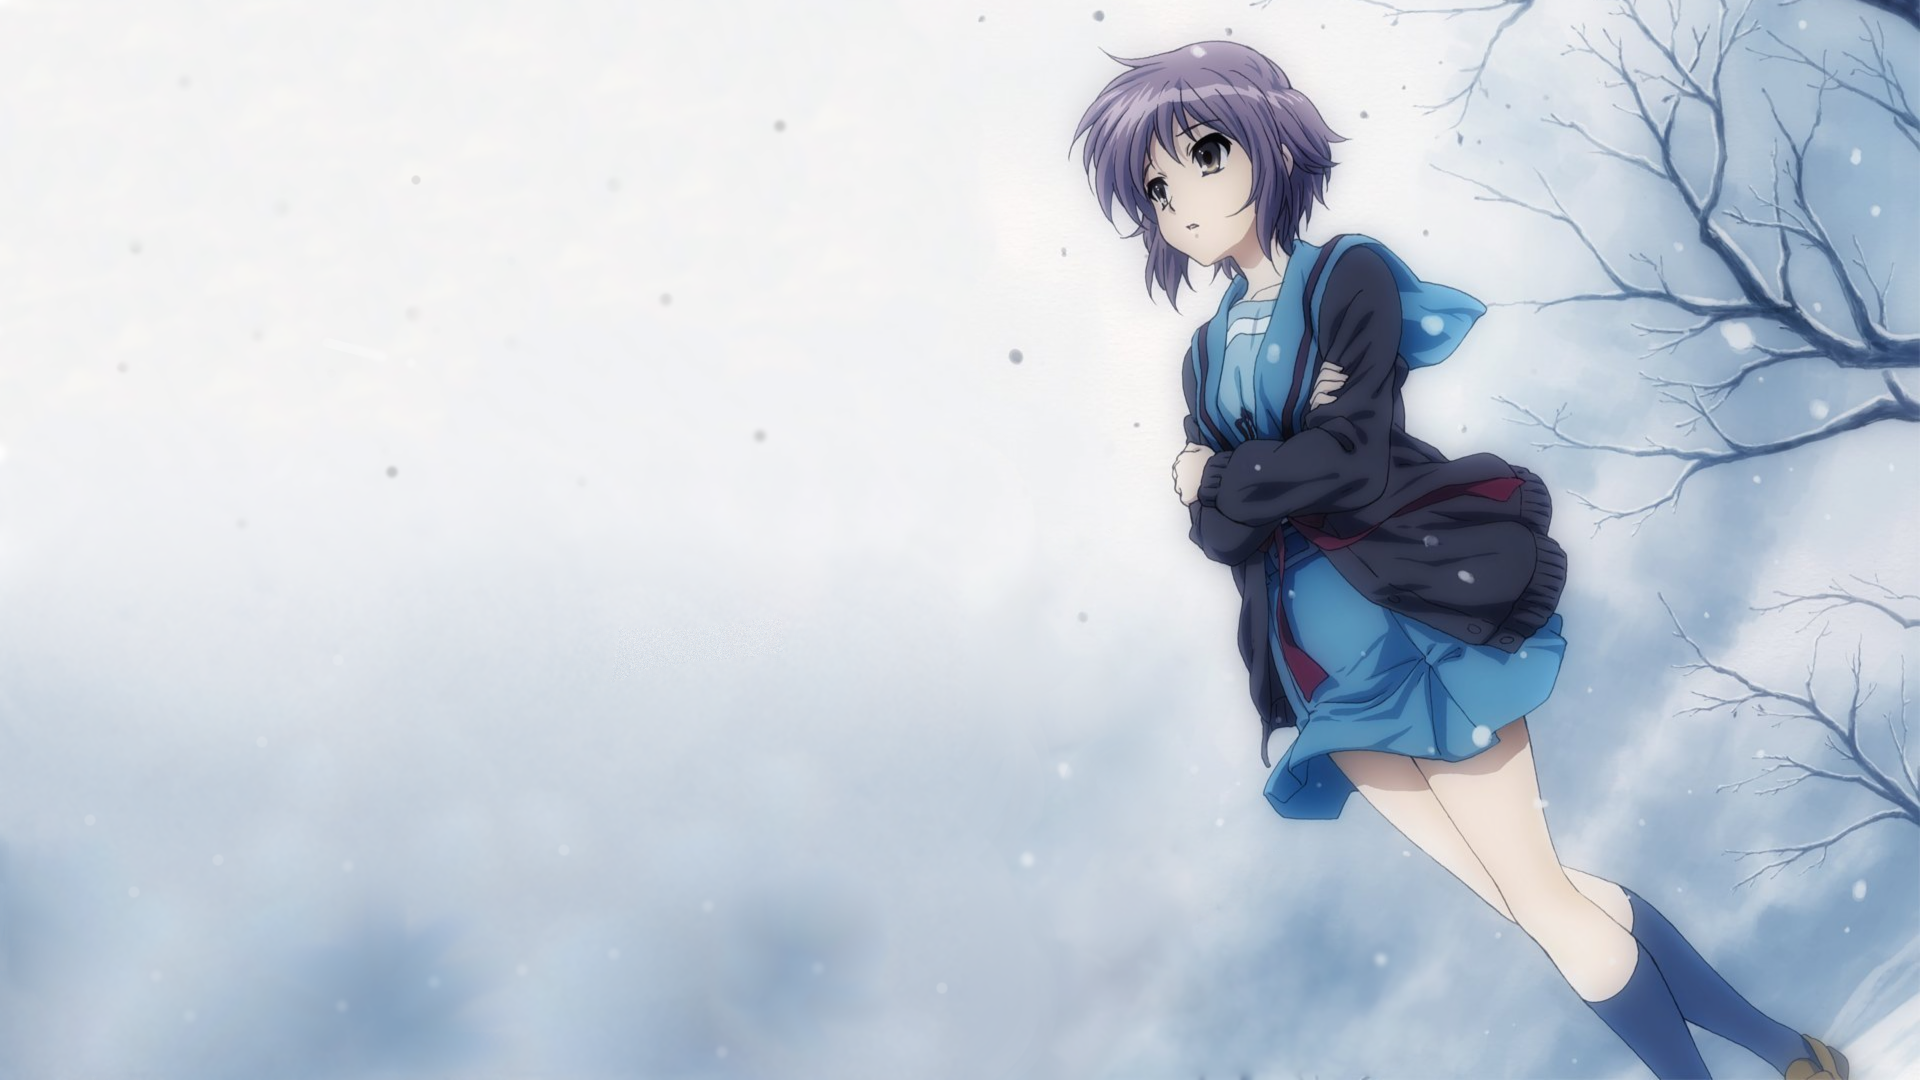 Anime Girls Wallpapers HD Pictures | One HD Wallpaper Pictures ...